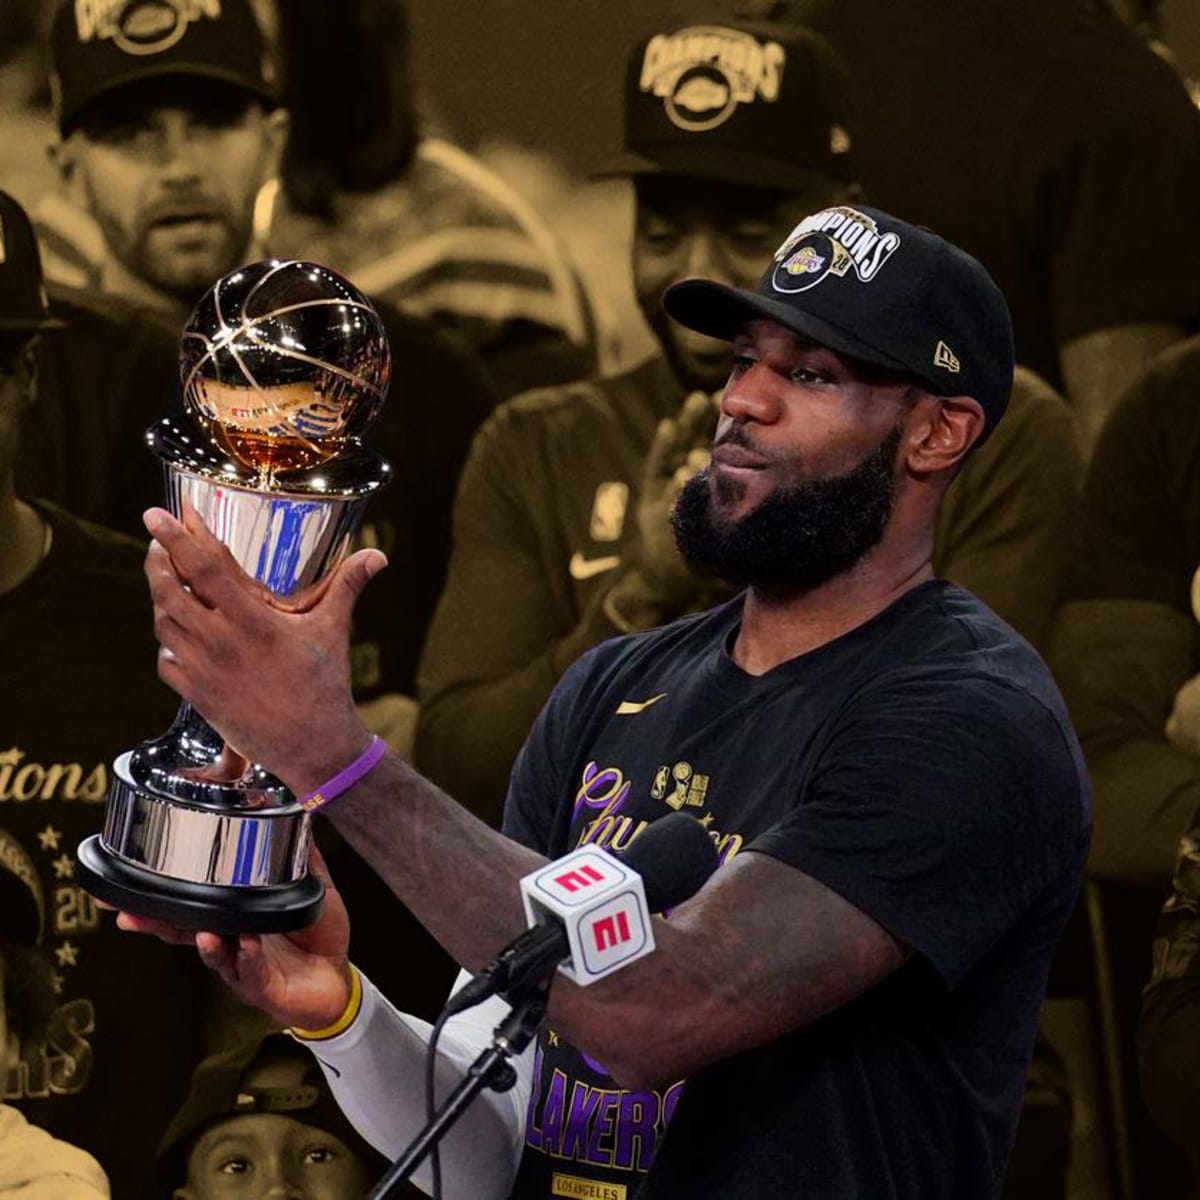 LeBron James on 4th Championship, Finals MVP: 'I Want My Damn Respect